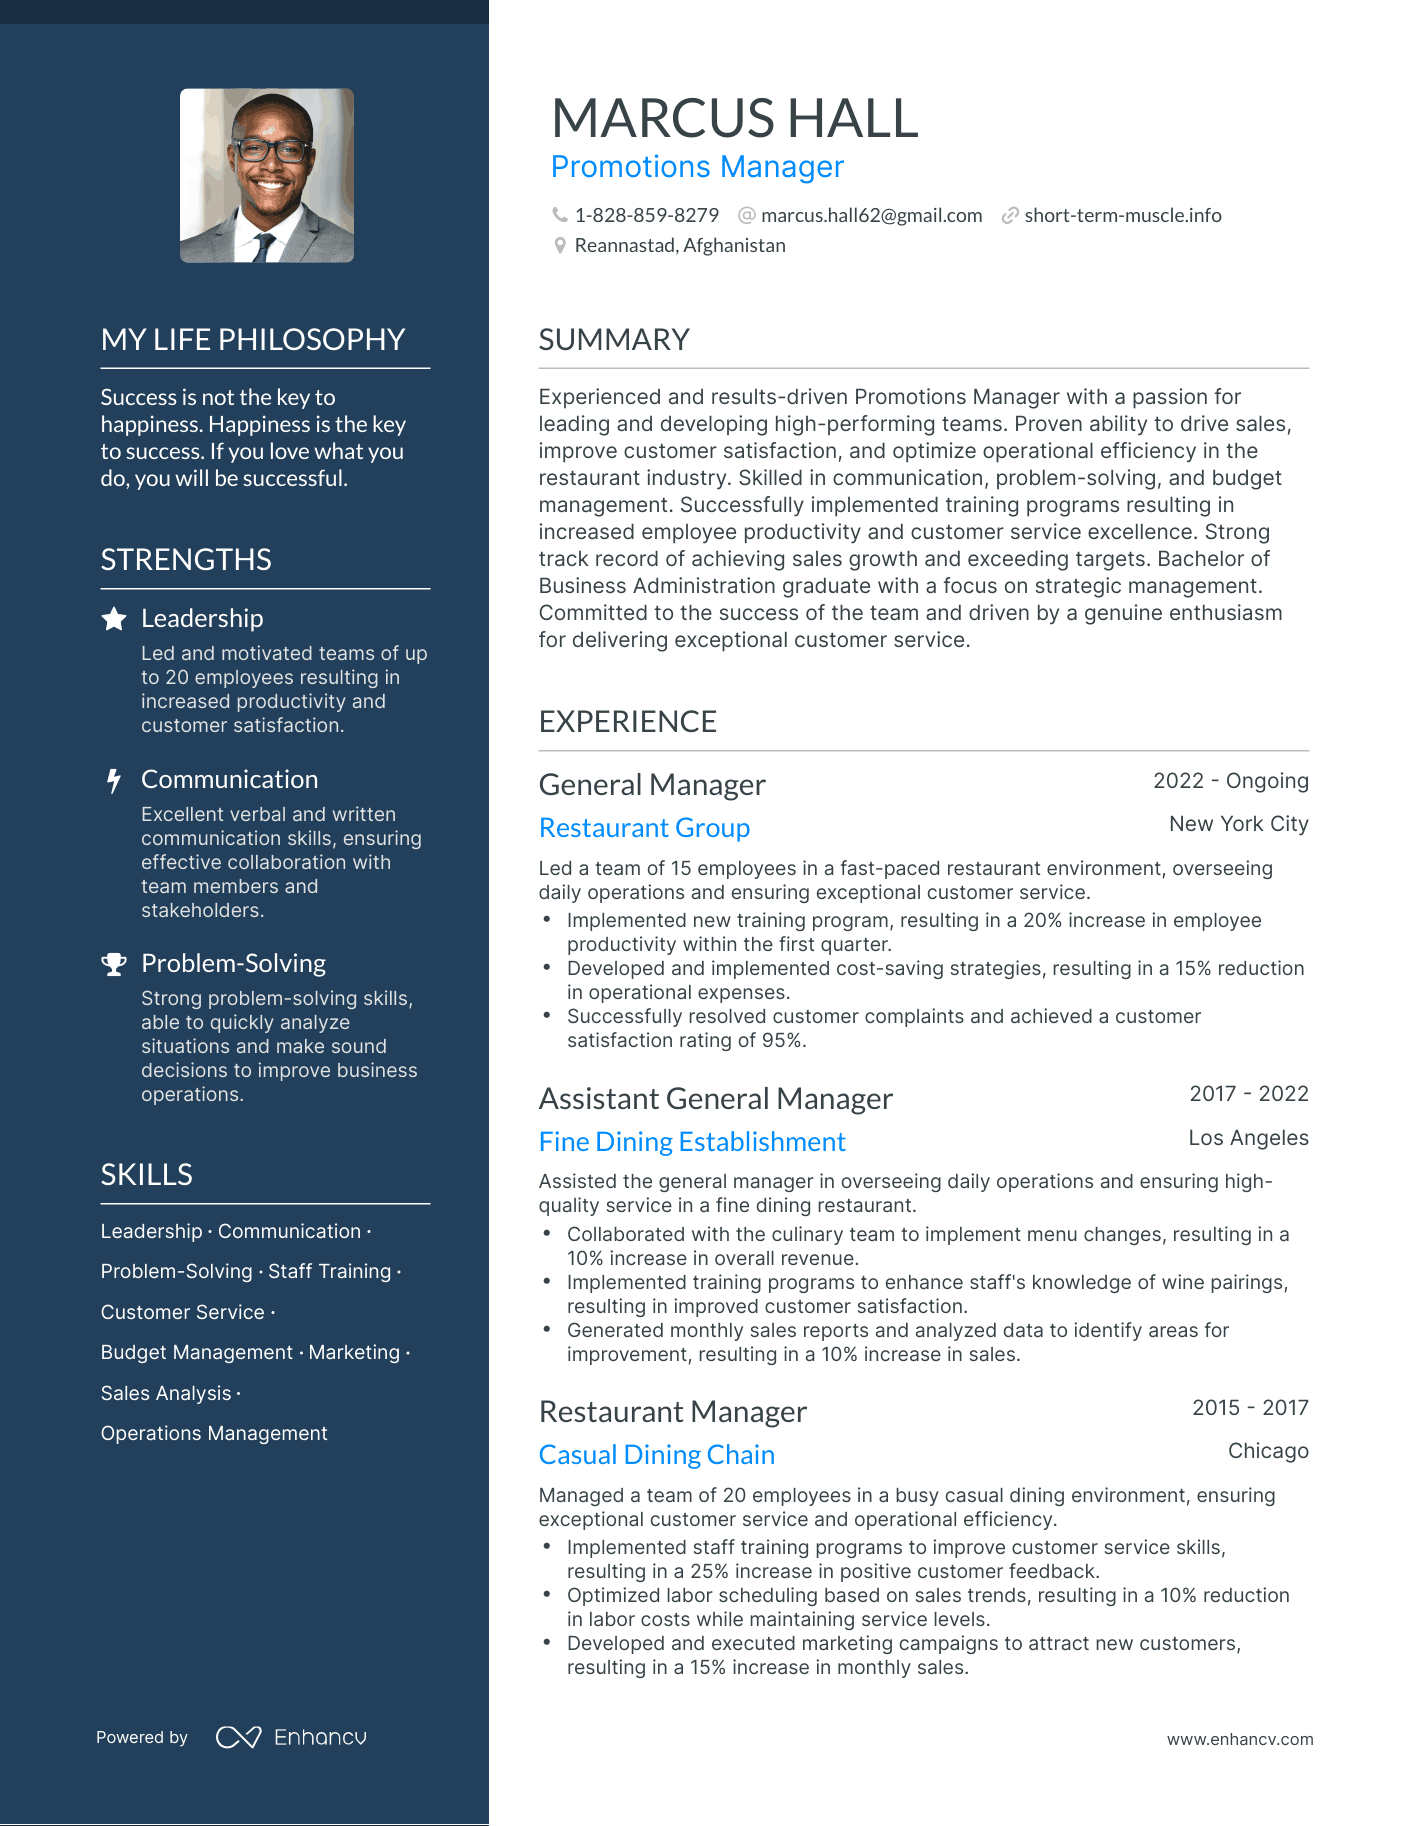 Promotions Manager resume example